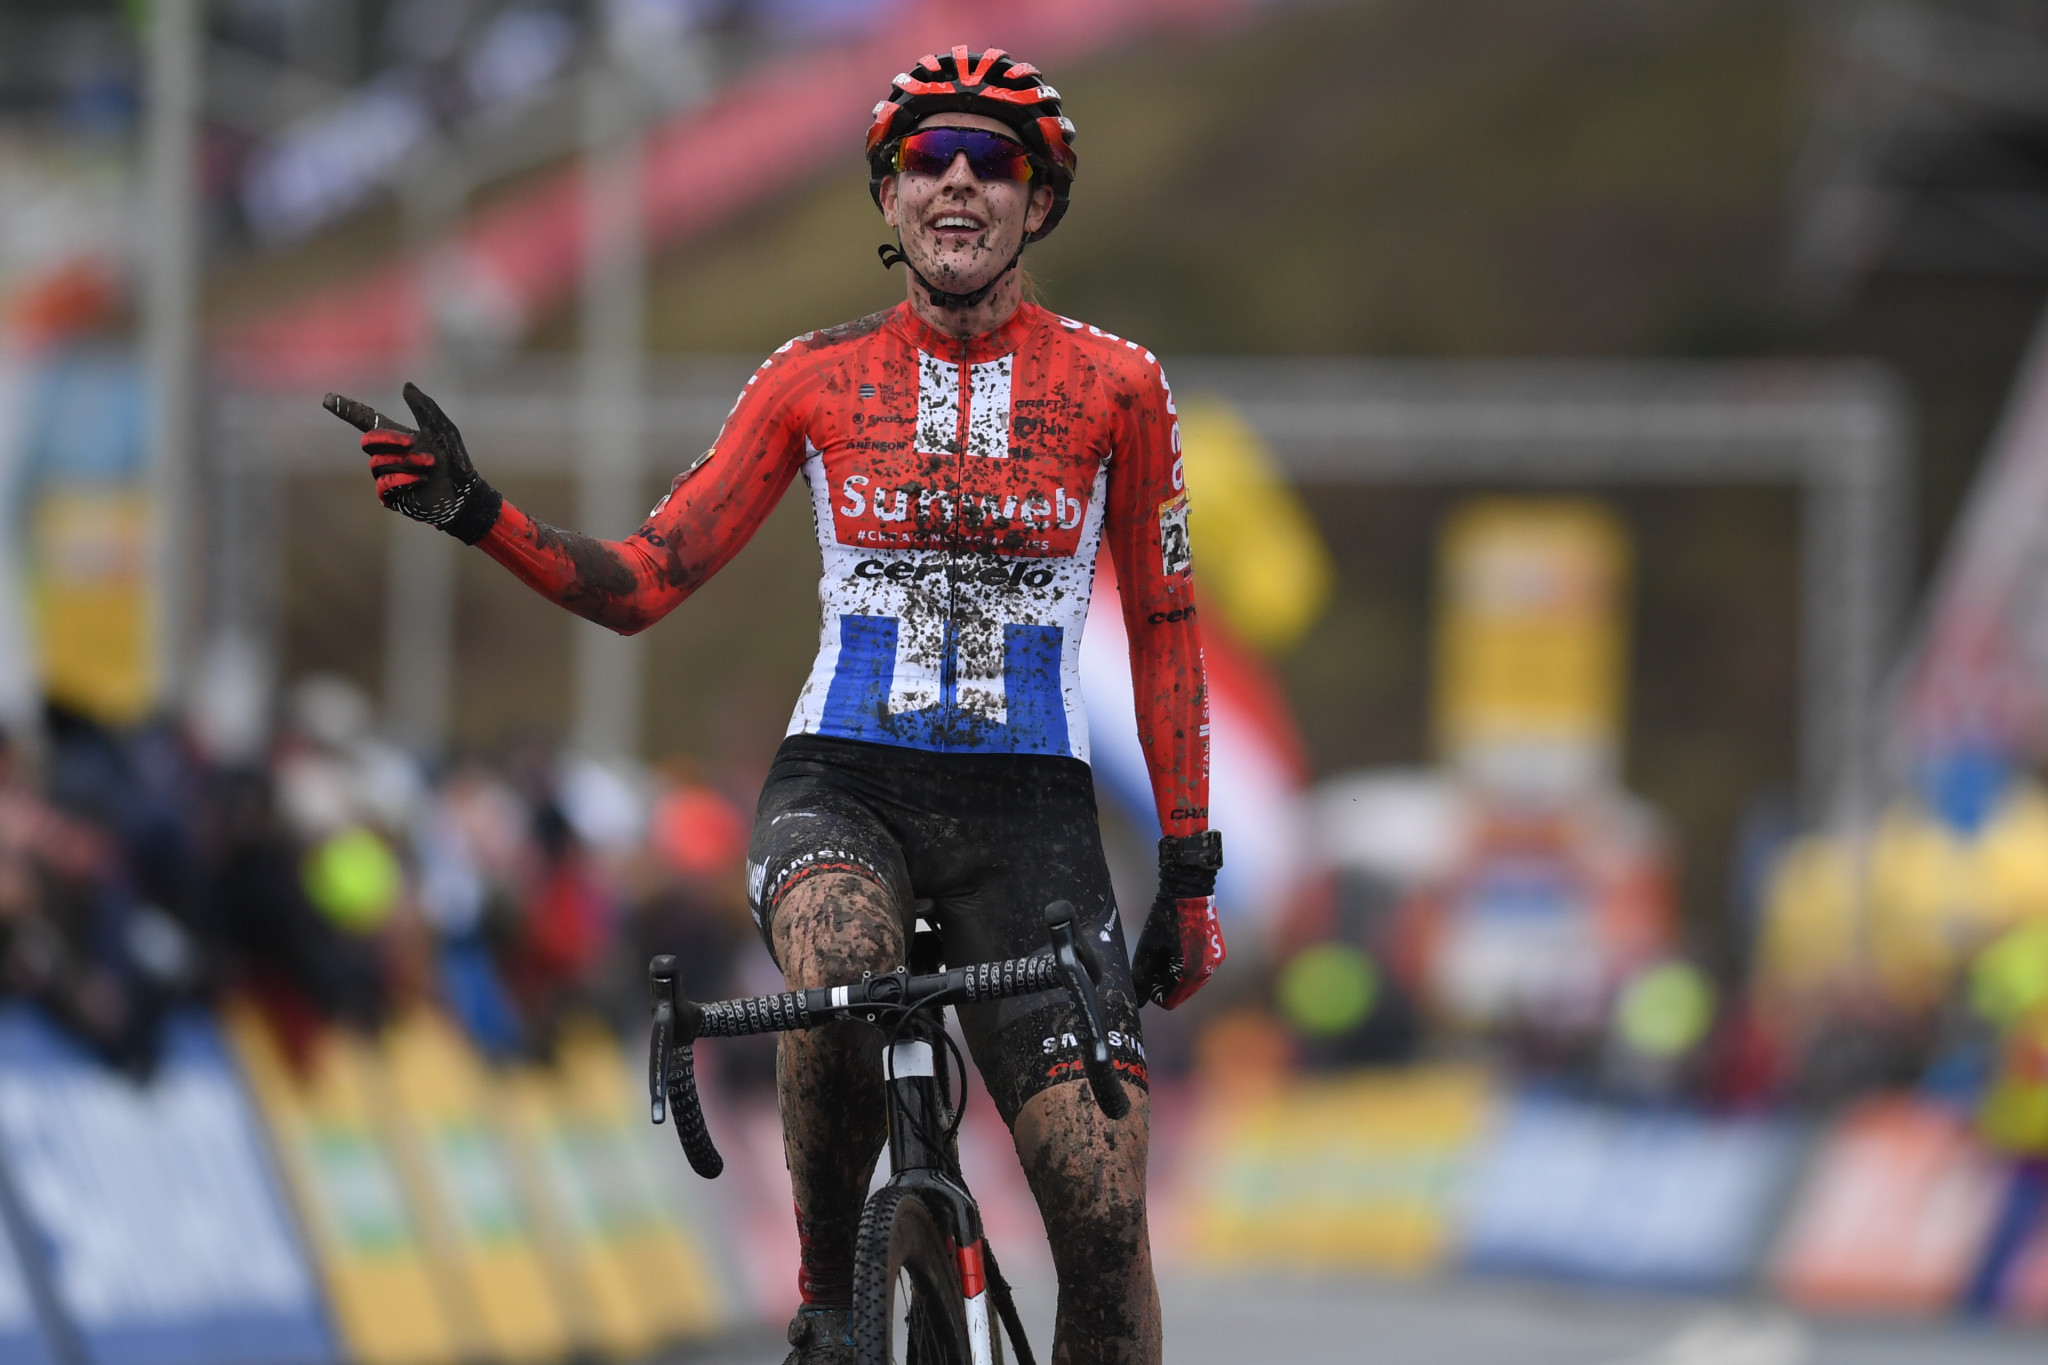 Lucinda Brand claimed her third victory of the season in the women's race ©Getty Images